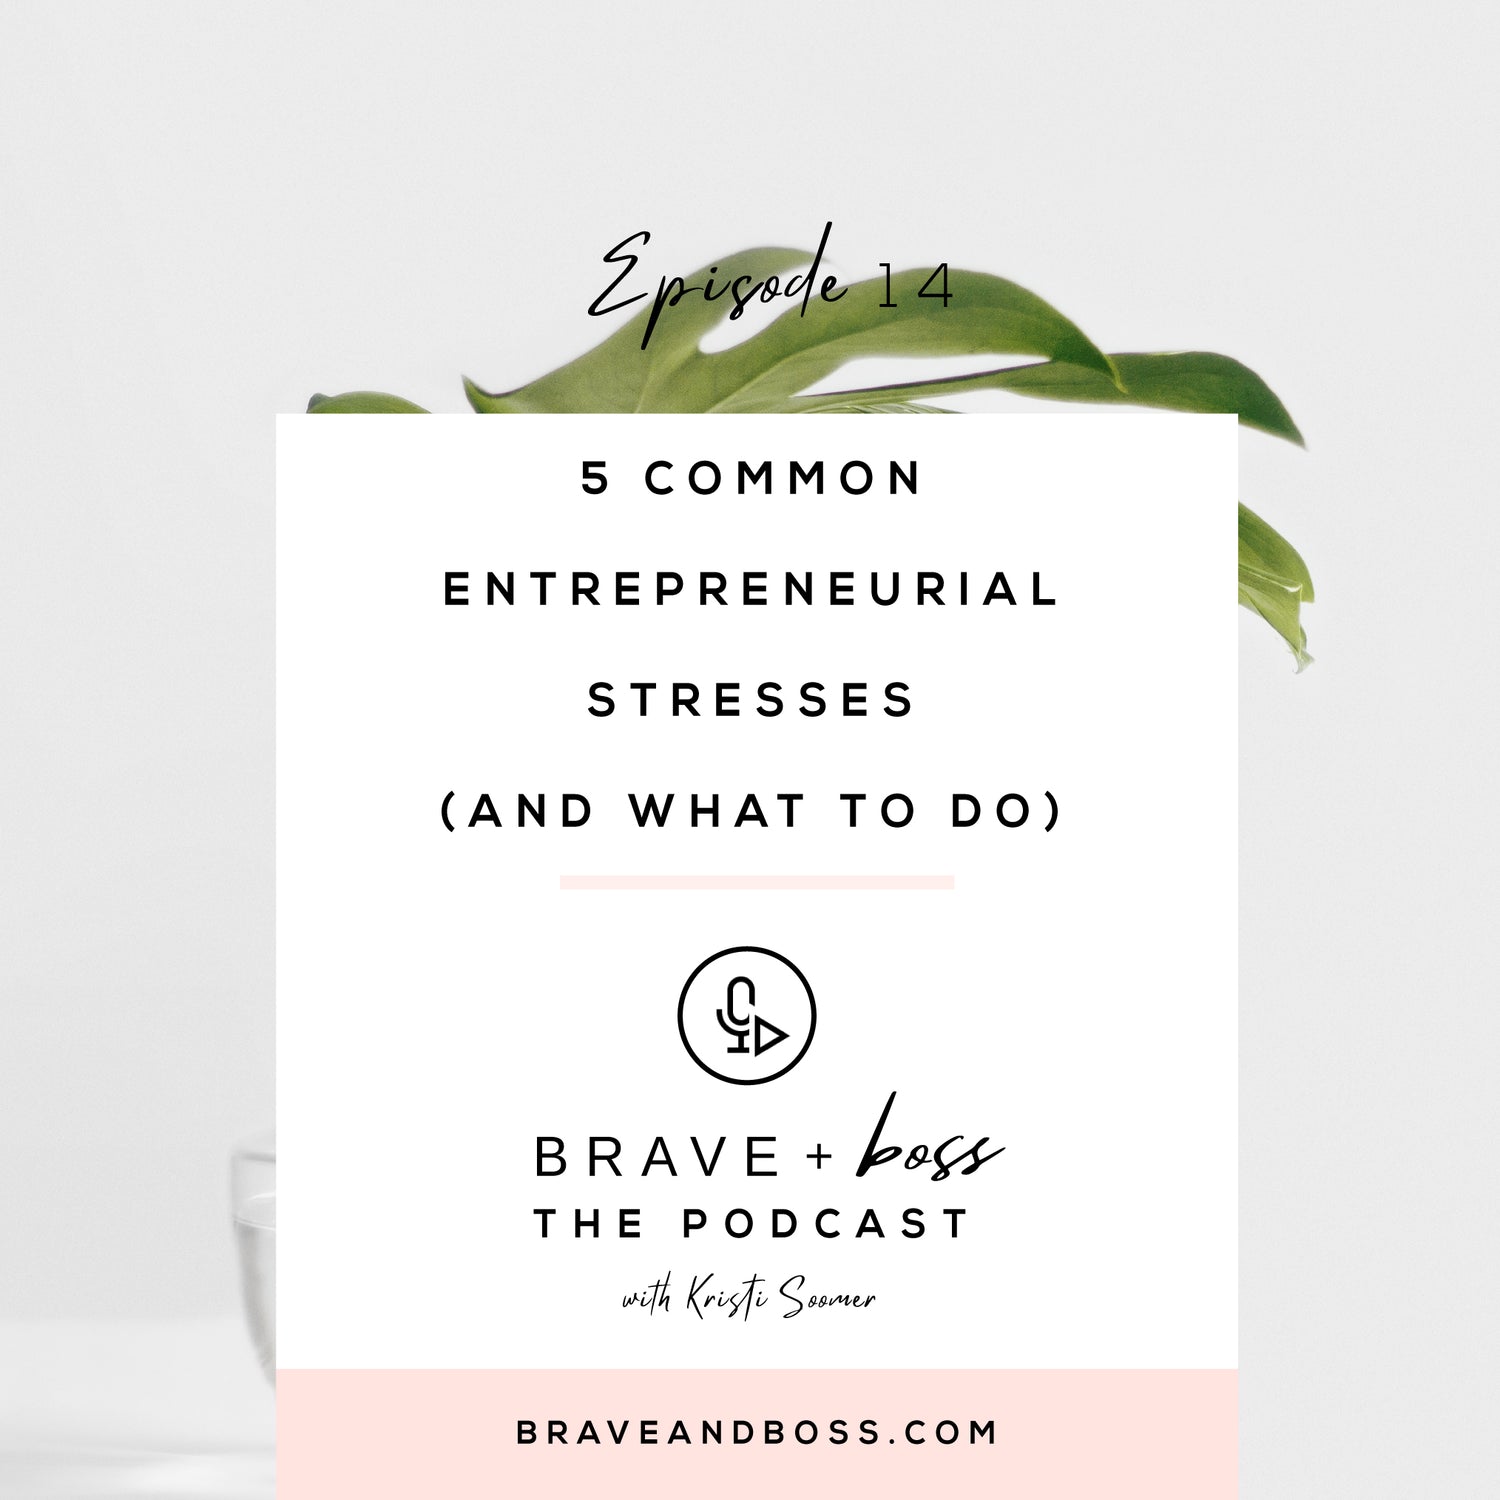 5 Common Entrepreneurial Stresses (And what to do!)